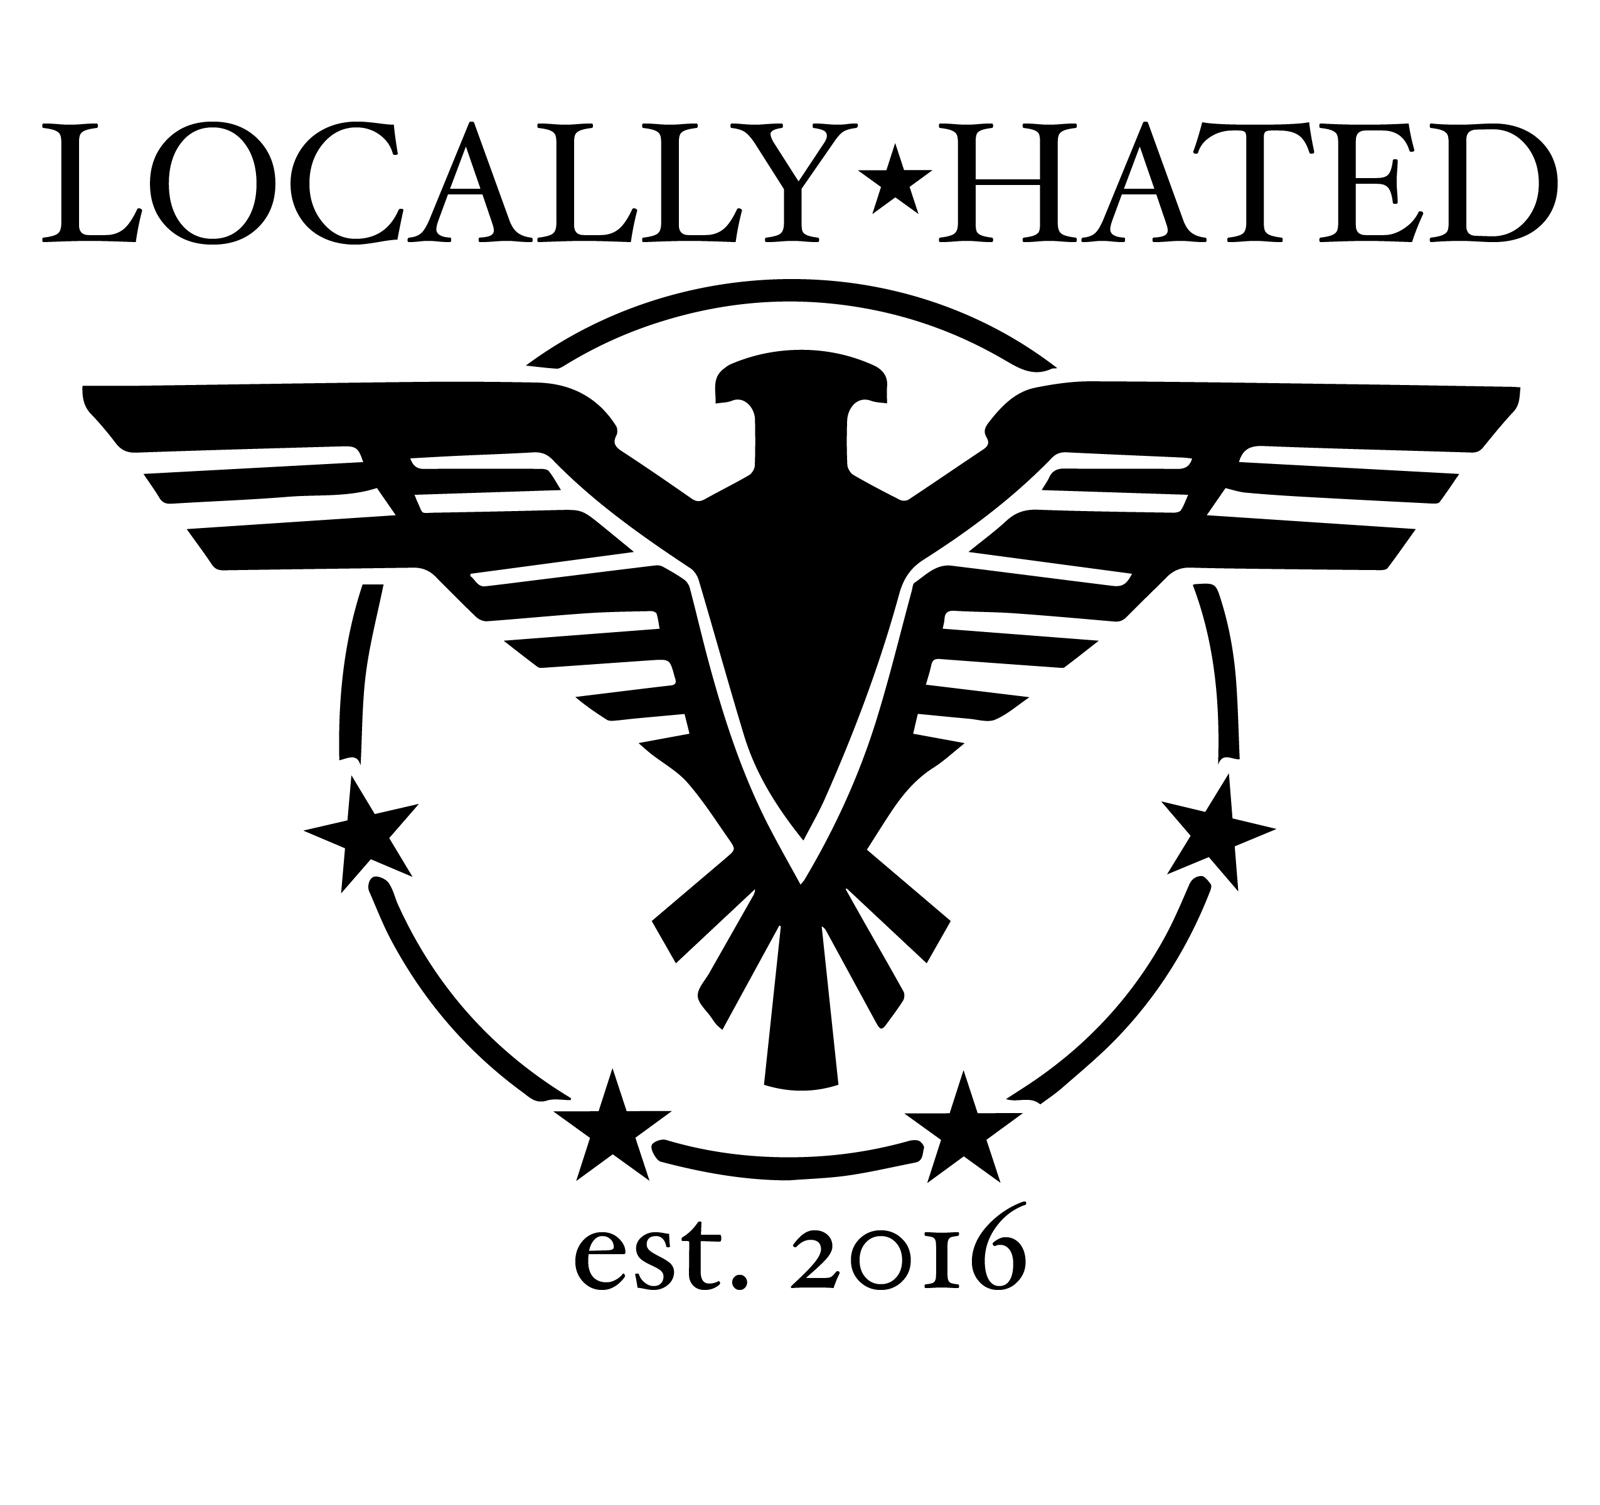 Locally Hated Crew